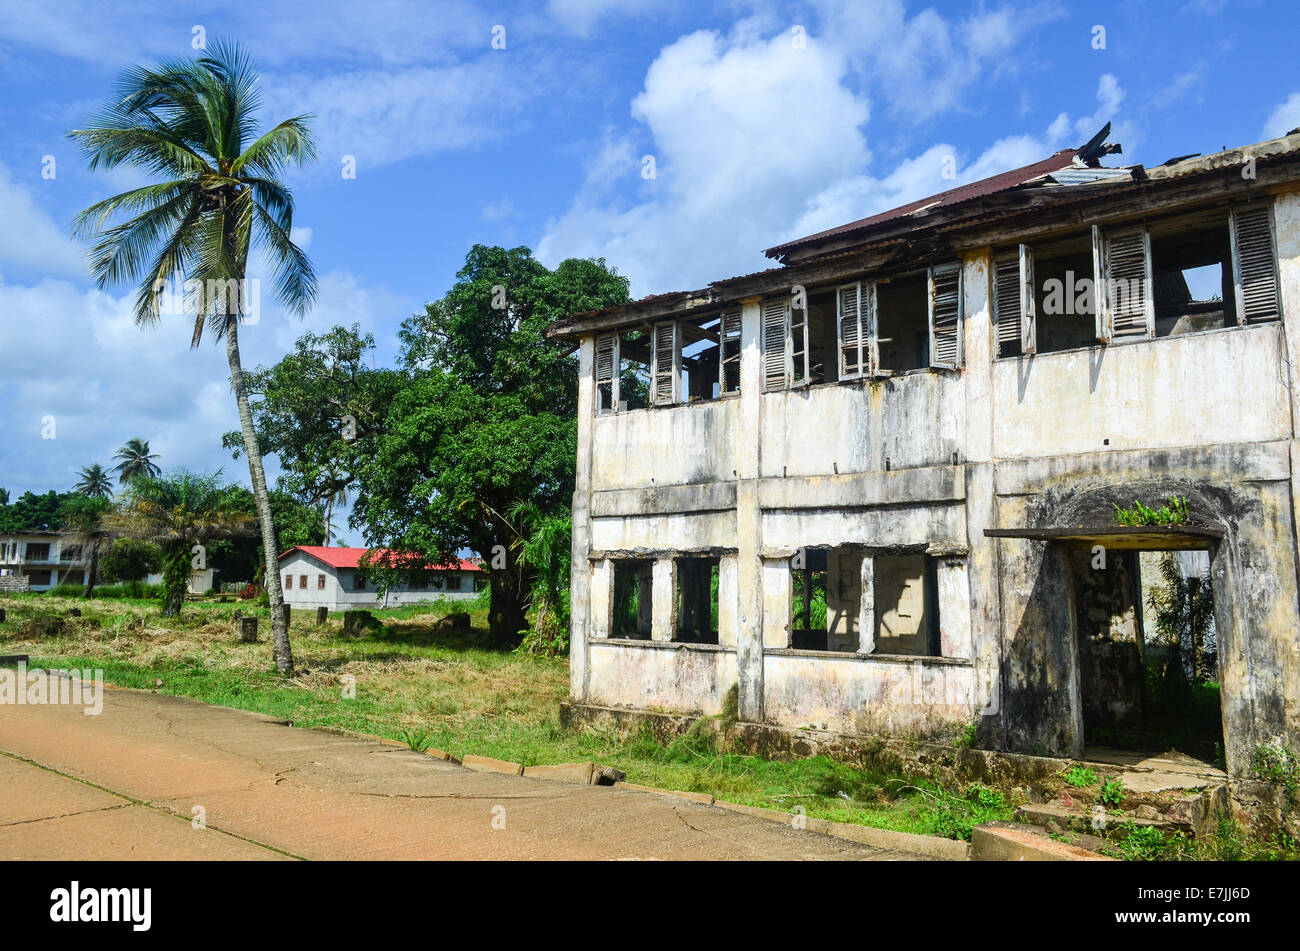 Ruins (from the civil war) and palm trees in Robertsport, a coastal town in Liberia, Africa Stock Photo